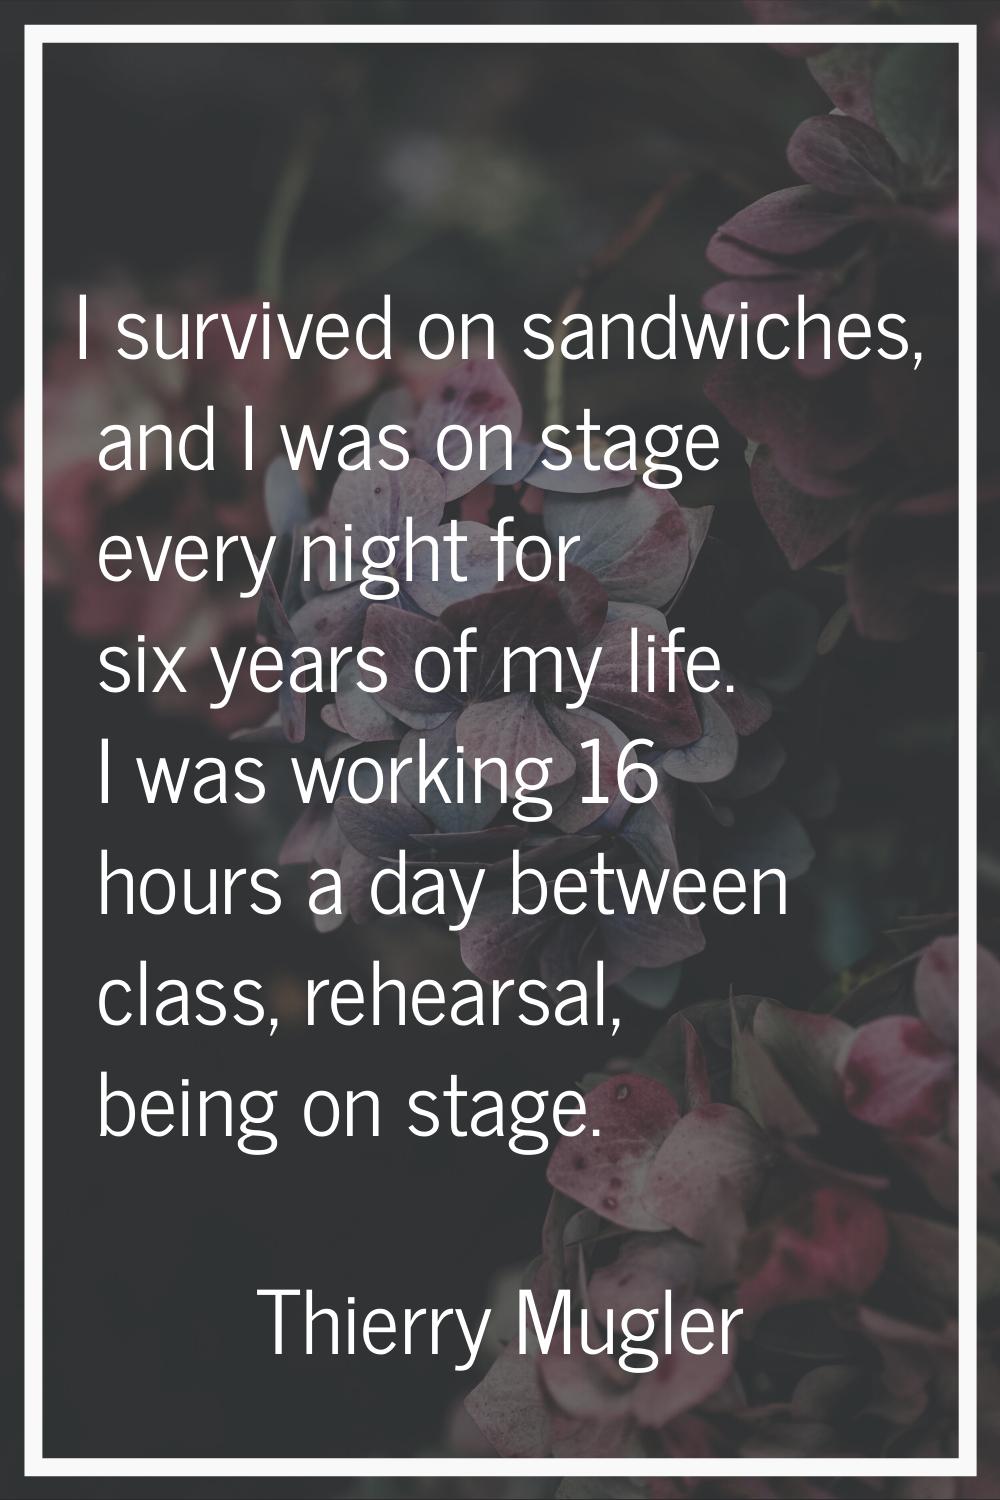 I survived on sandwiches, and I was on stage every night for six years of my life. I was working 16